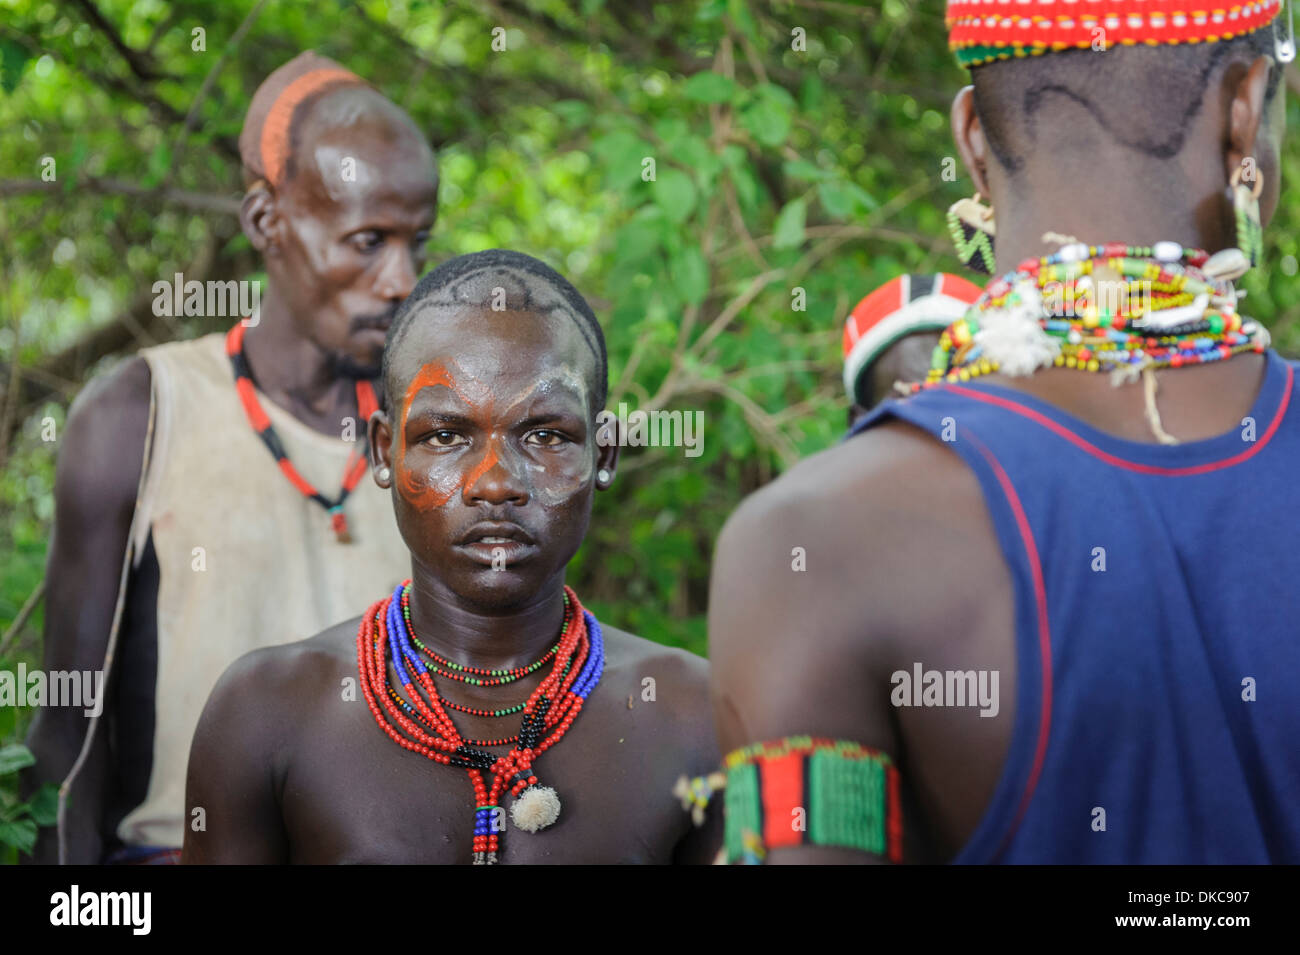 Maza getting ready to participate in the bull jumping ceremony, Omo valley, Ethiopia Stock Photo